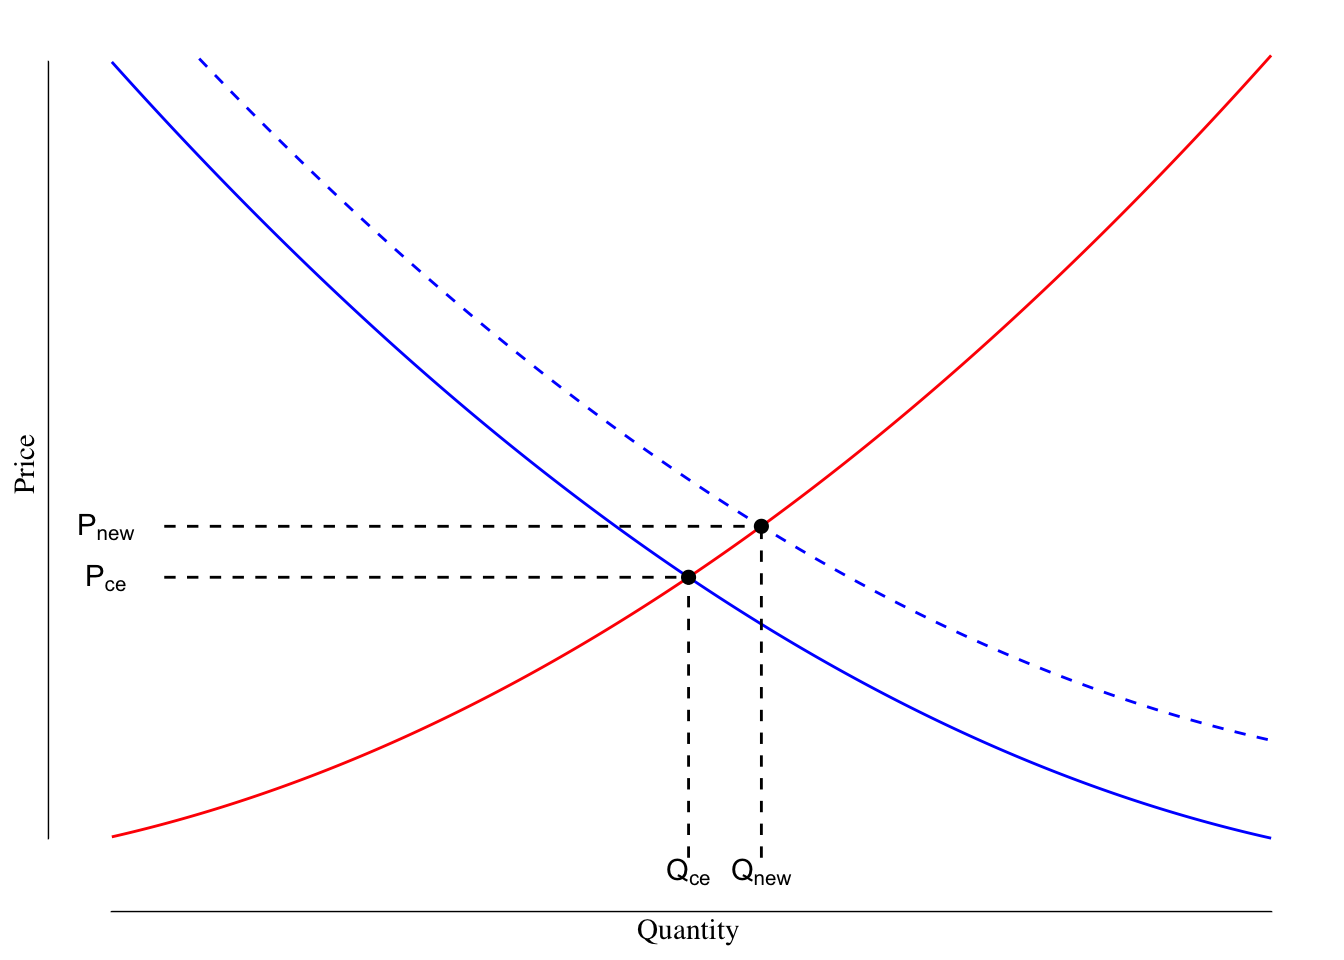 Supply and Demand Curves for Nintendo Switch. The supply line is shown in red. The orginal demand line is shown as a solid blue line while the demand after the market changes in shown as the dashed blue line.